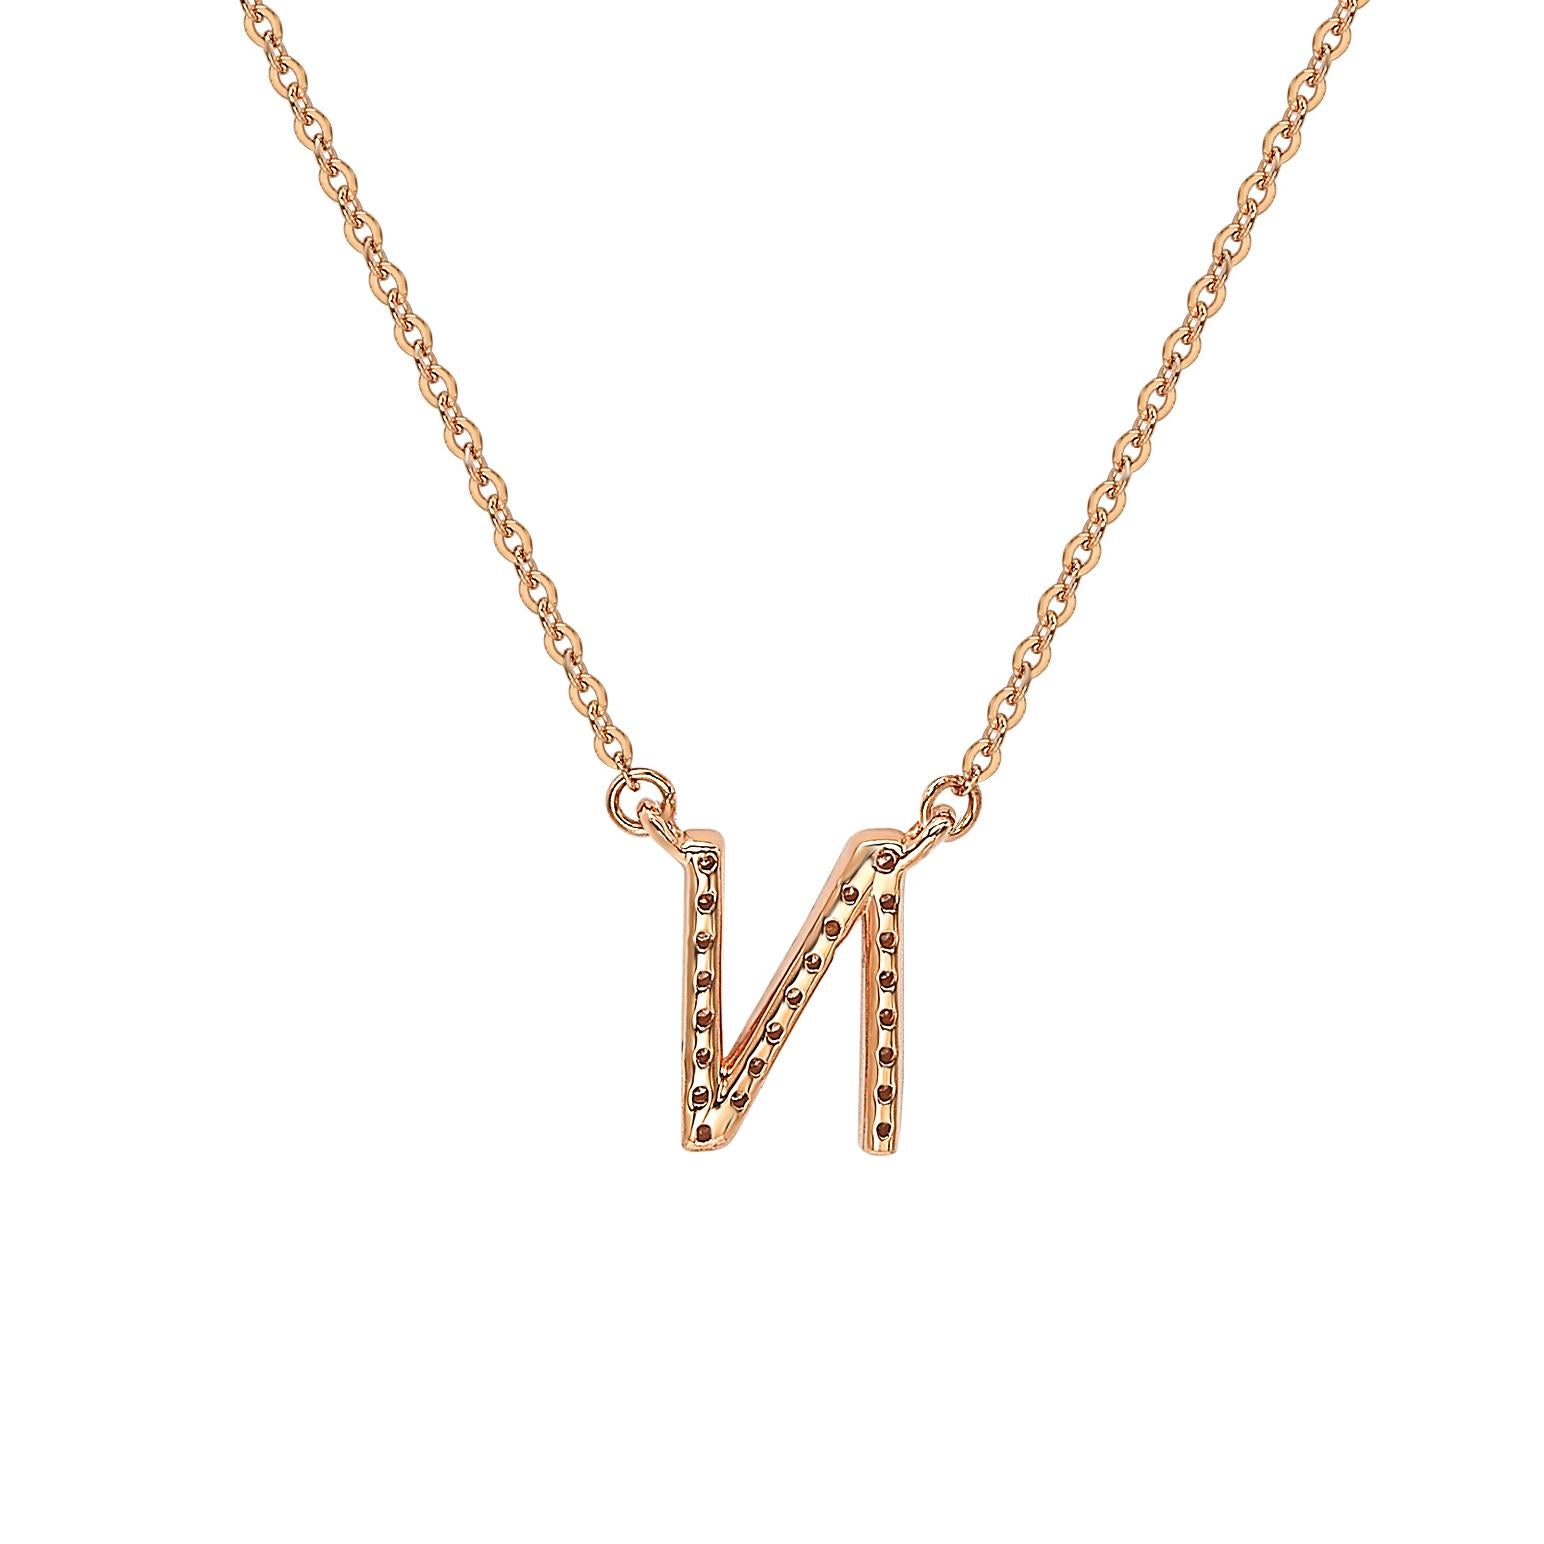 This breathtaking personalized Suzy Levian letter necklace features natural diamonds, hand-set in 14-Karat rose gold. It's the perfect individualized gift to let someone special know you're thinking of them. Each letter necklace features a row of